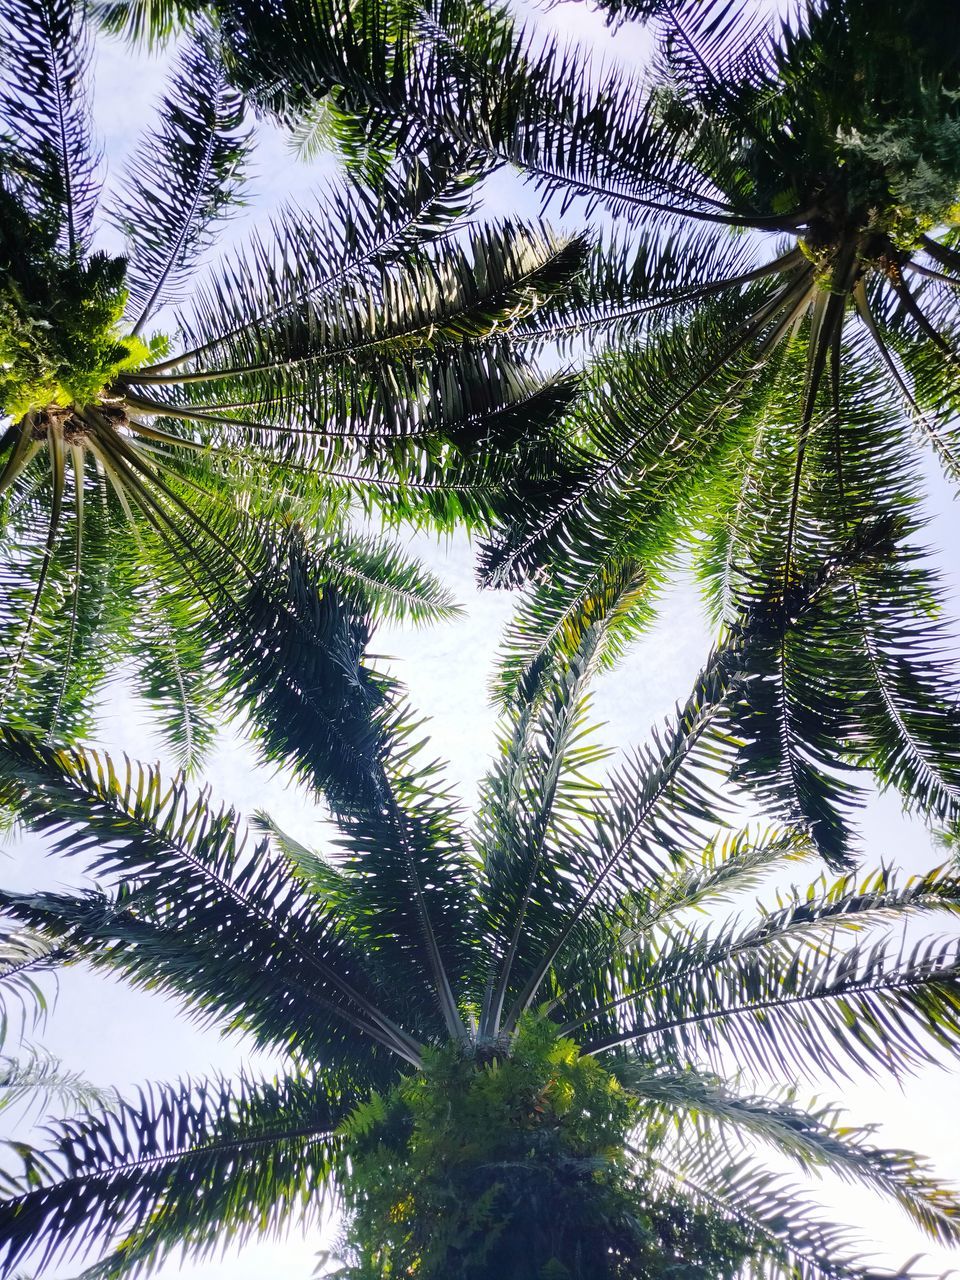 tree, plant, palm tree, tropical climate, growth, low angle view, leaf, beauty in nature, palm leaf, nature, no people, green, branch, borassus flabellifer, tranquility, plant part, sky, day, outdoors, backgrounds, tropical tree, full frame, trunk, directly below, tree trunk, sunlight